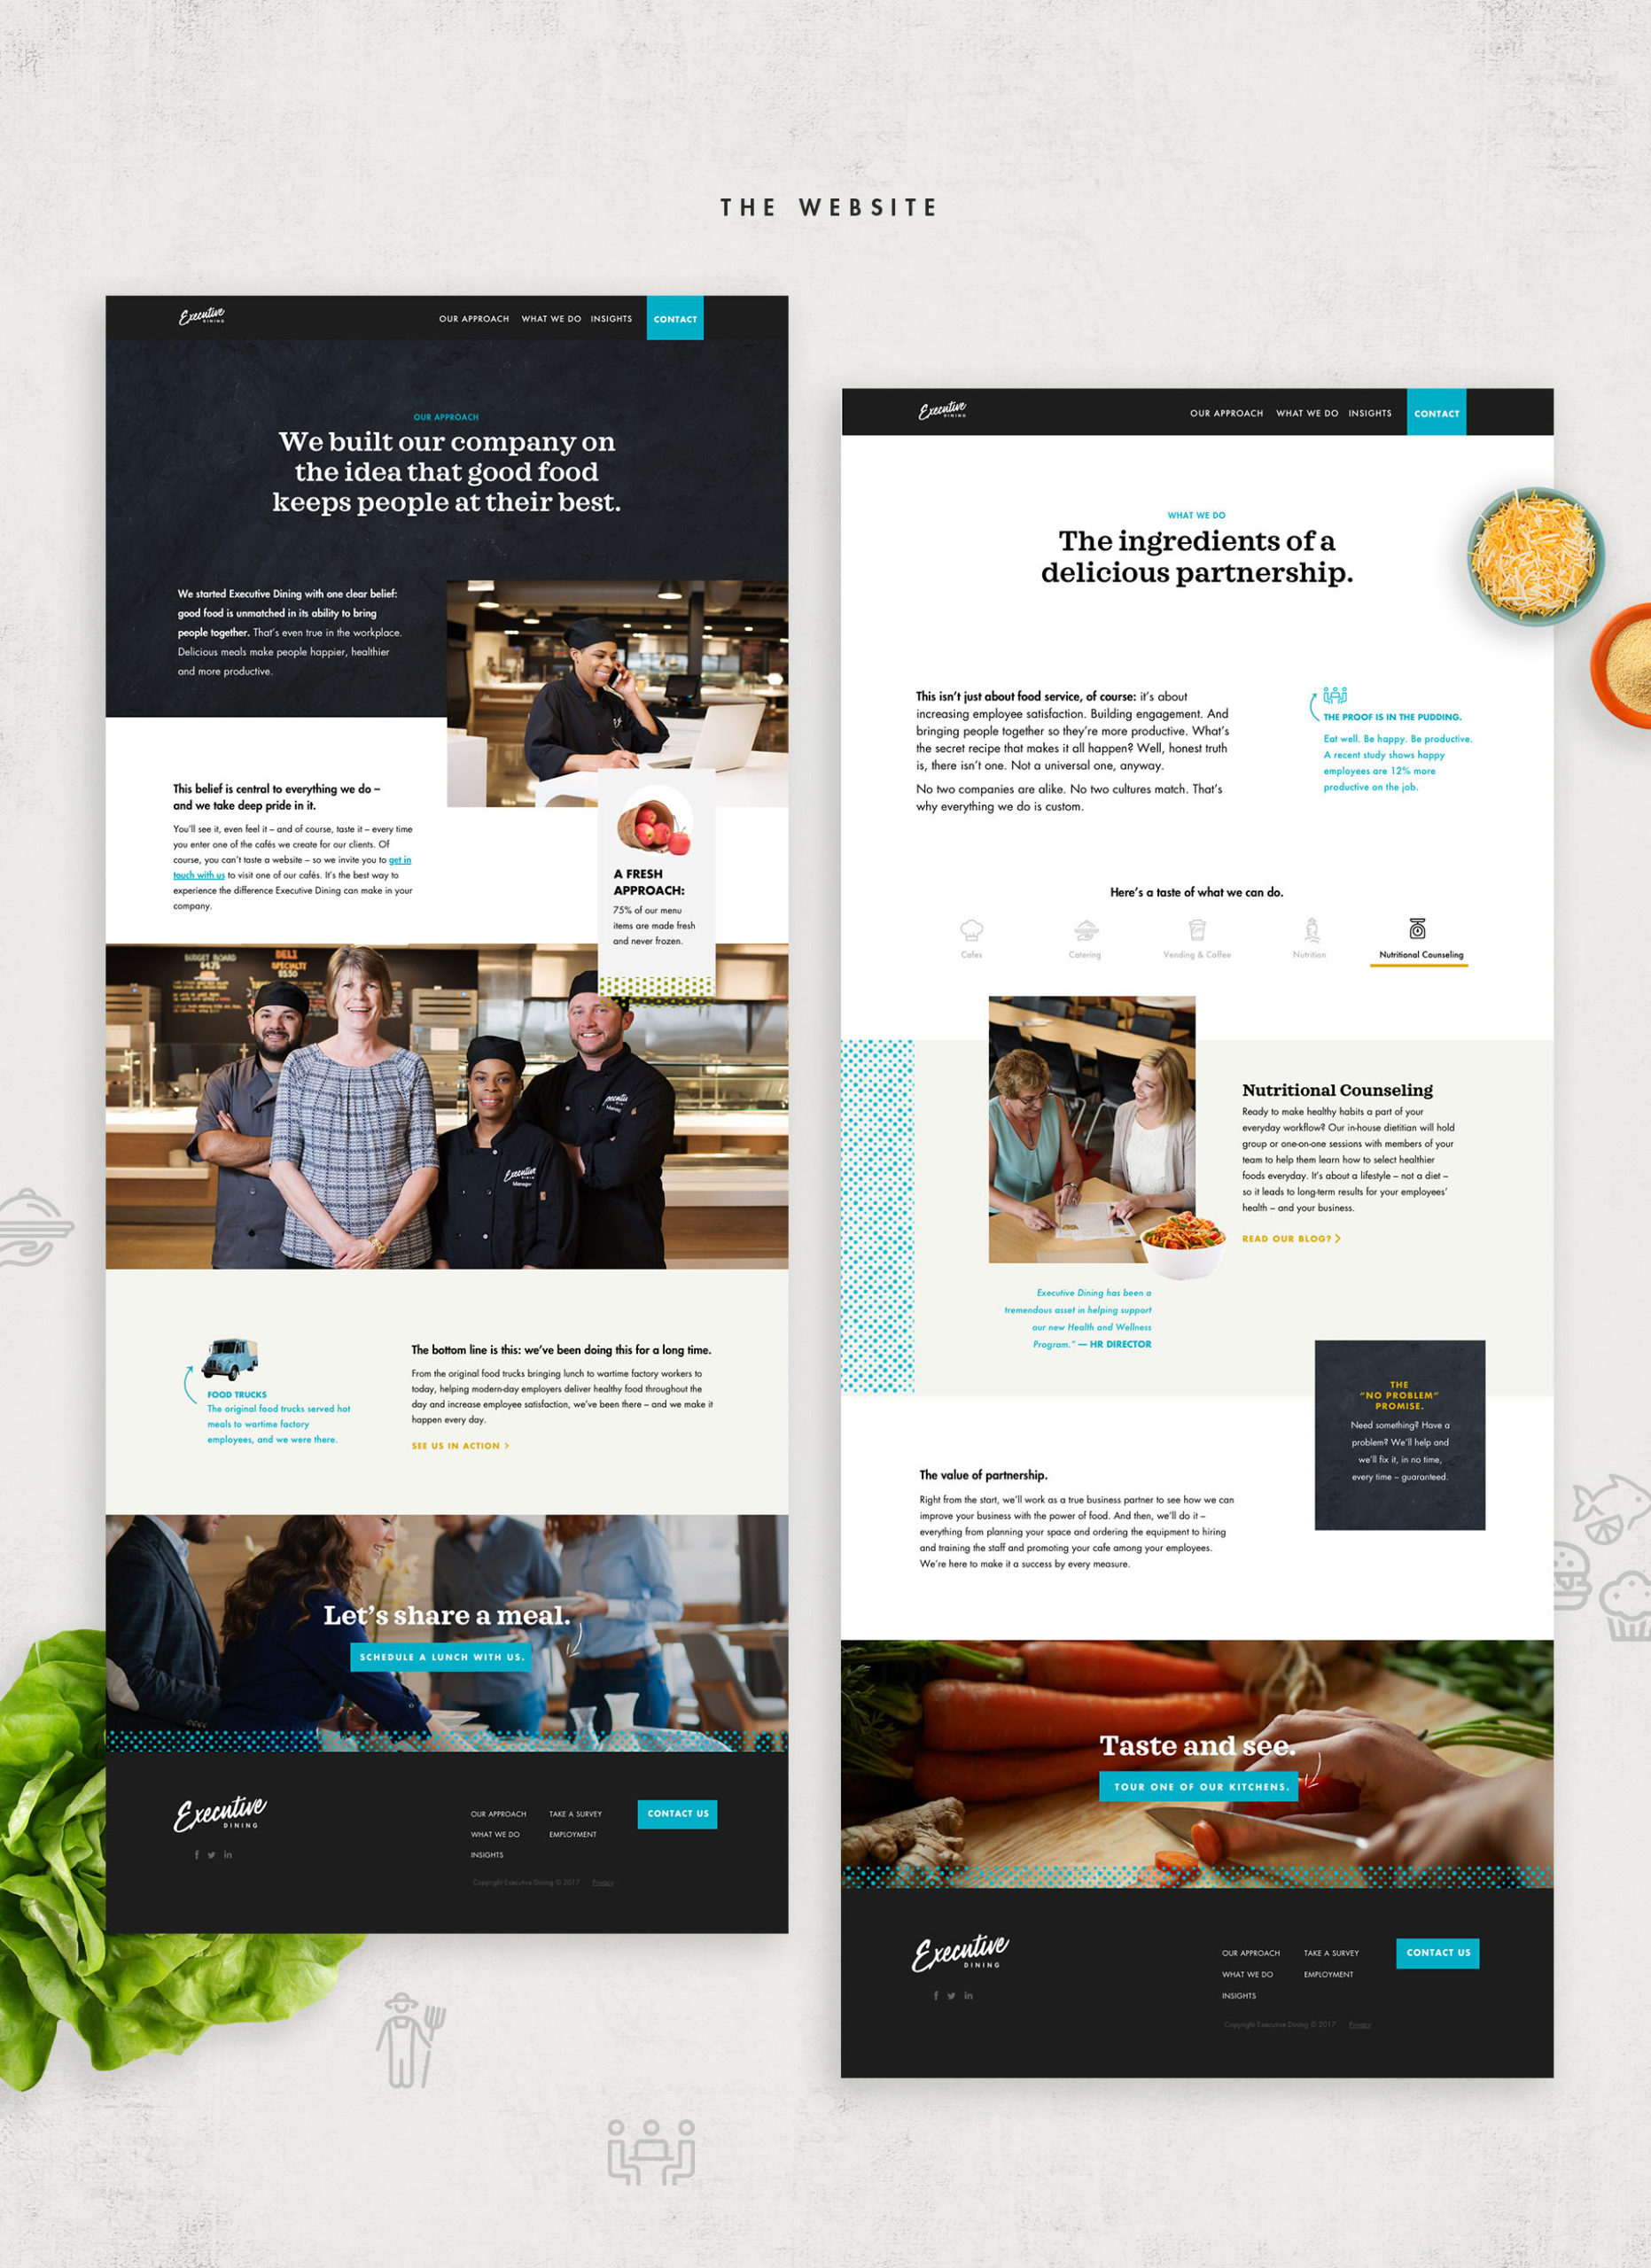 Designs for the Executive Dining Website's secondary pages